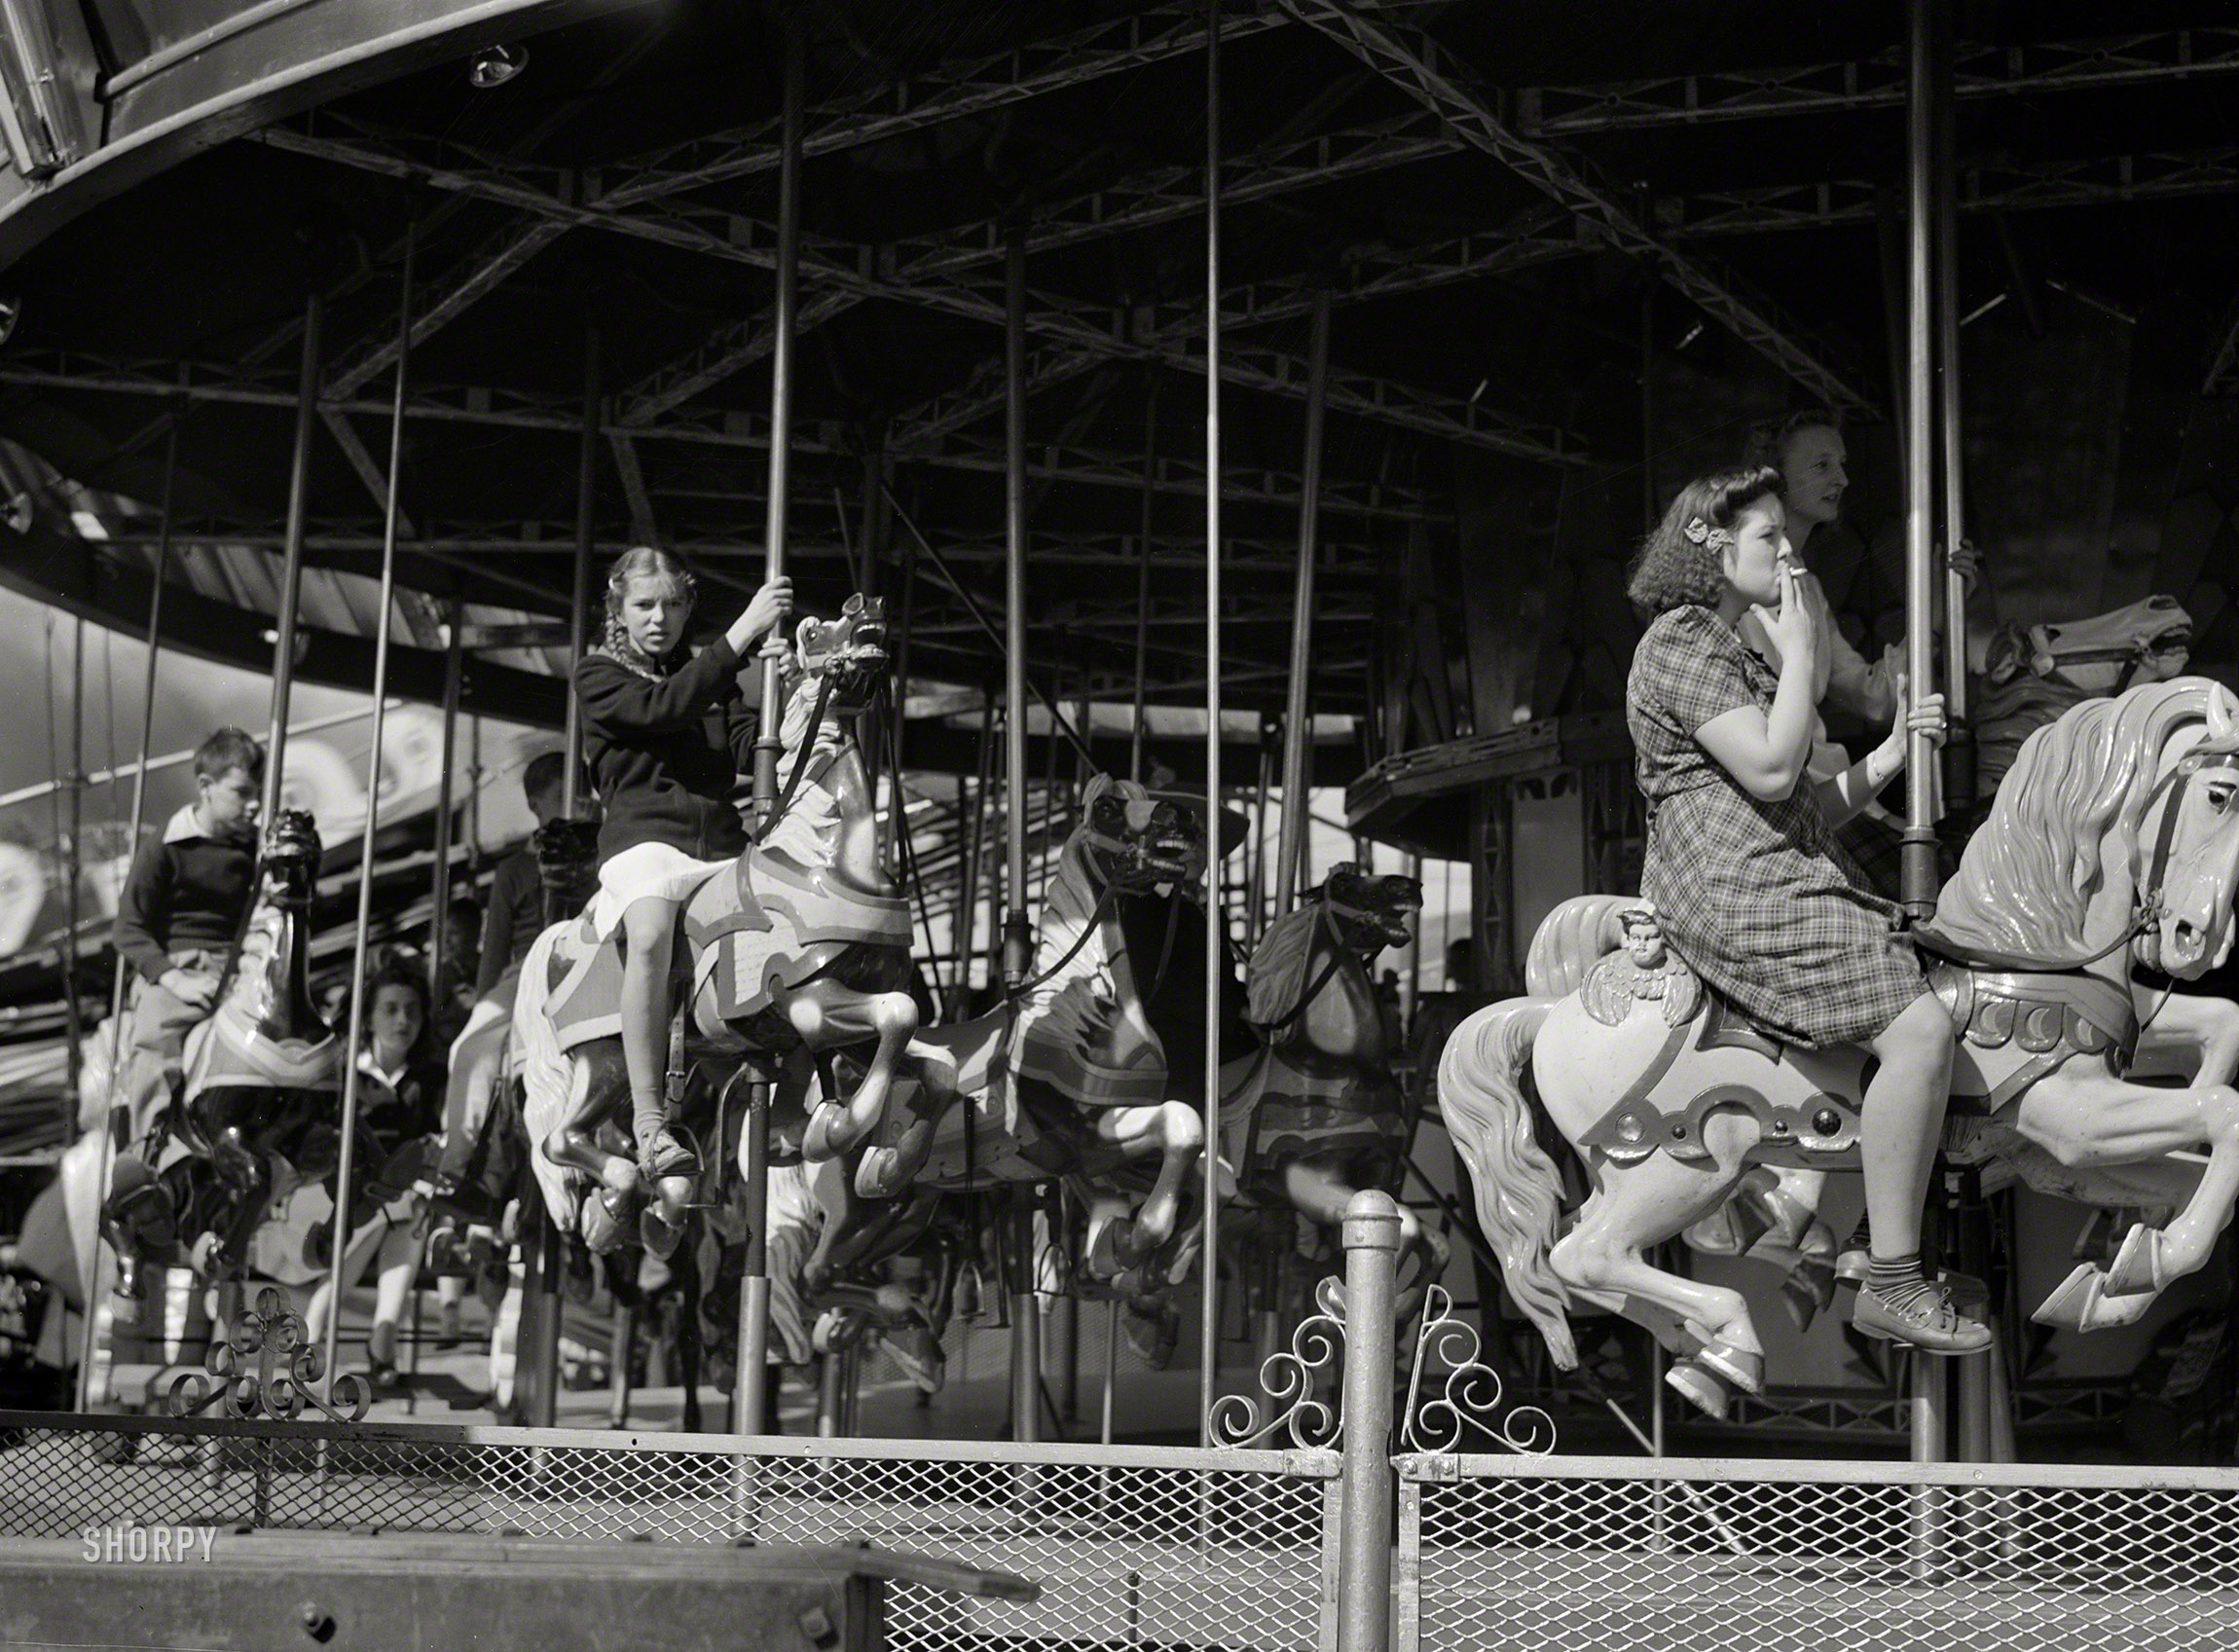 September 1941. "The merry-go-round at the State Fair in Rutland, Vermont." Medium format acetate negative by Jack Delano. View full size.